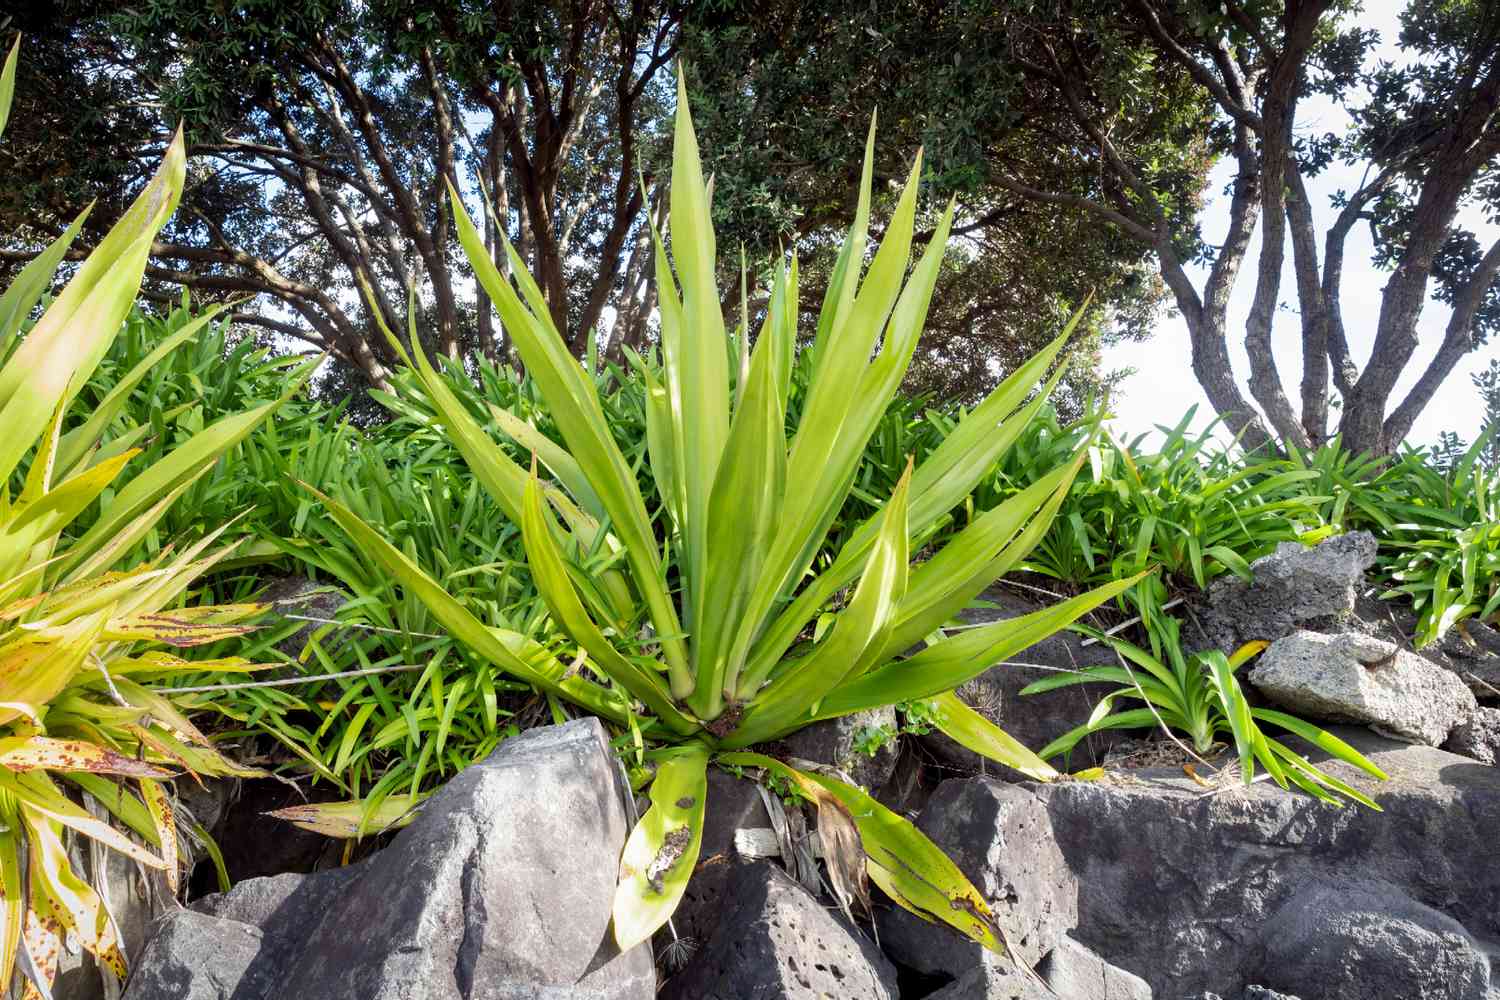 Mauritius hemp plant with long bright green sword-like leaves on large rocks